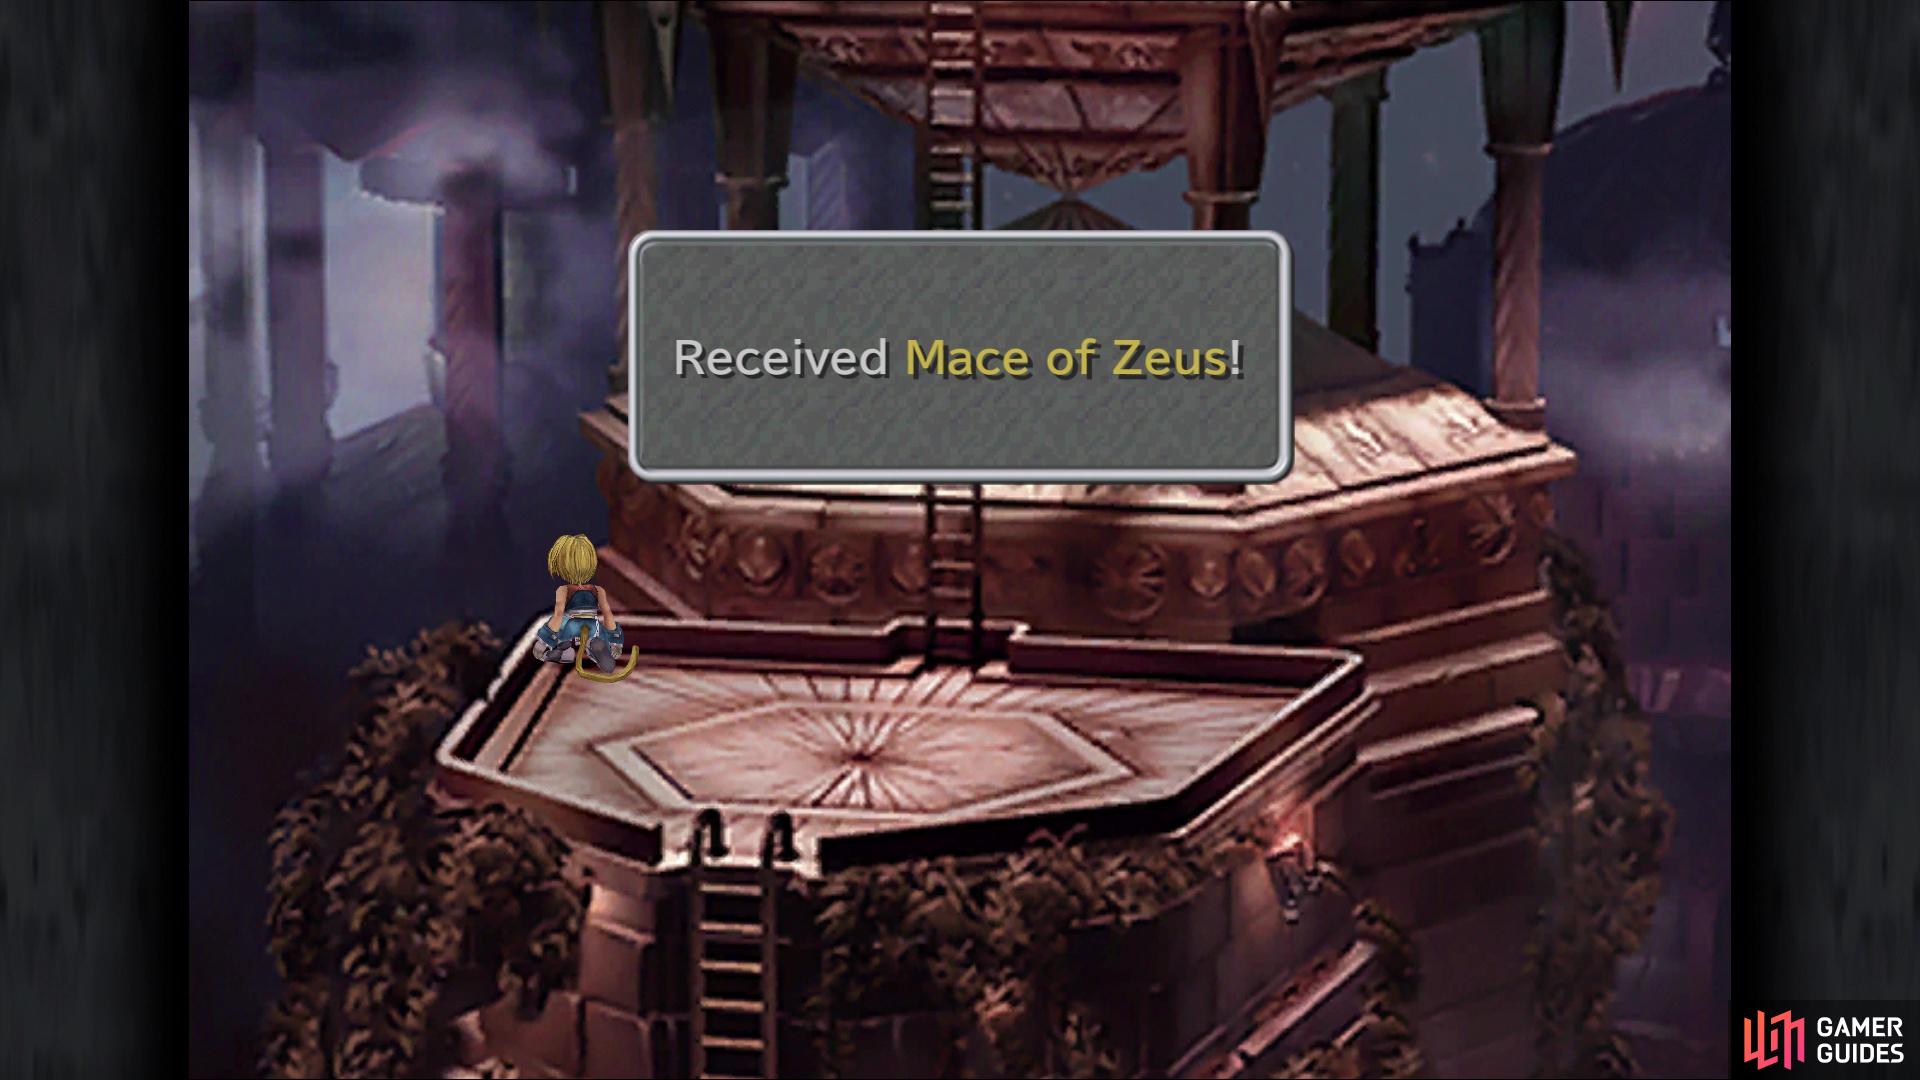 Vivi’s Mace of Zeus is found right before the second ladder